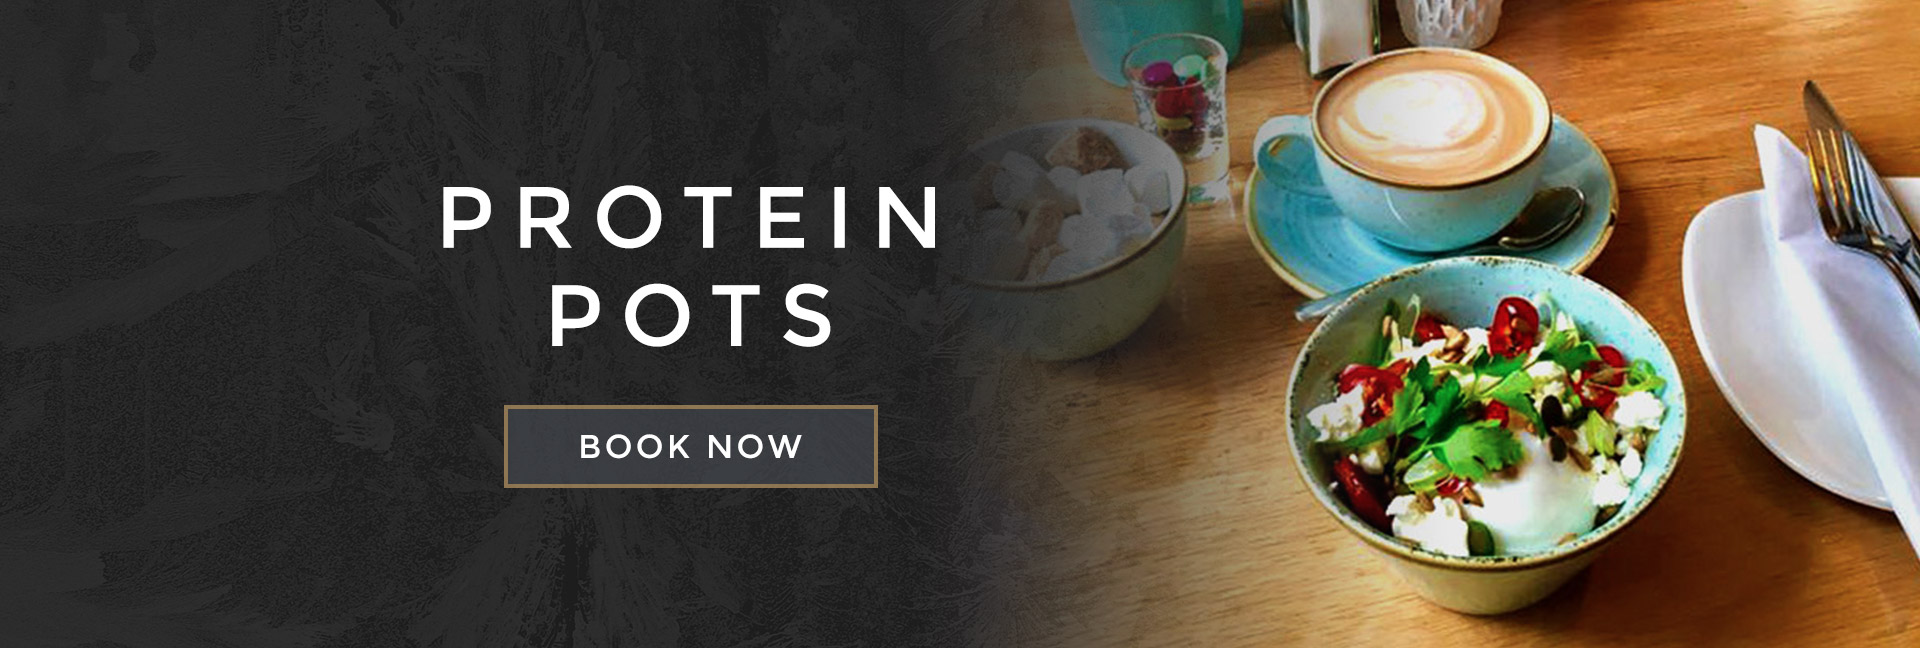 Protein pots at All Bar One Milton Keynes - Book your table